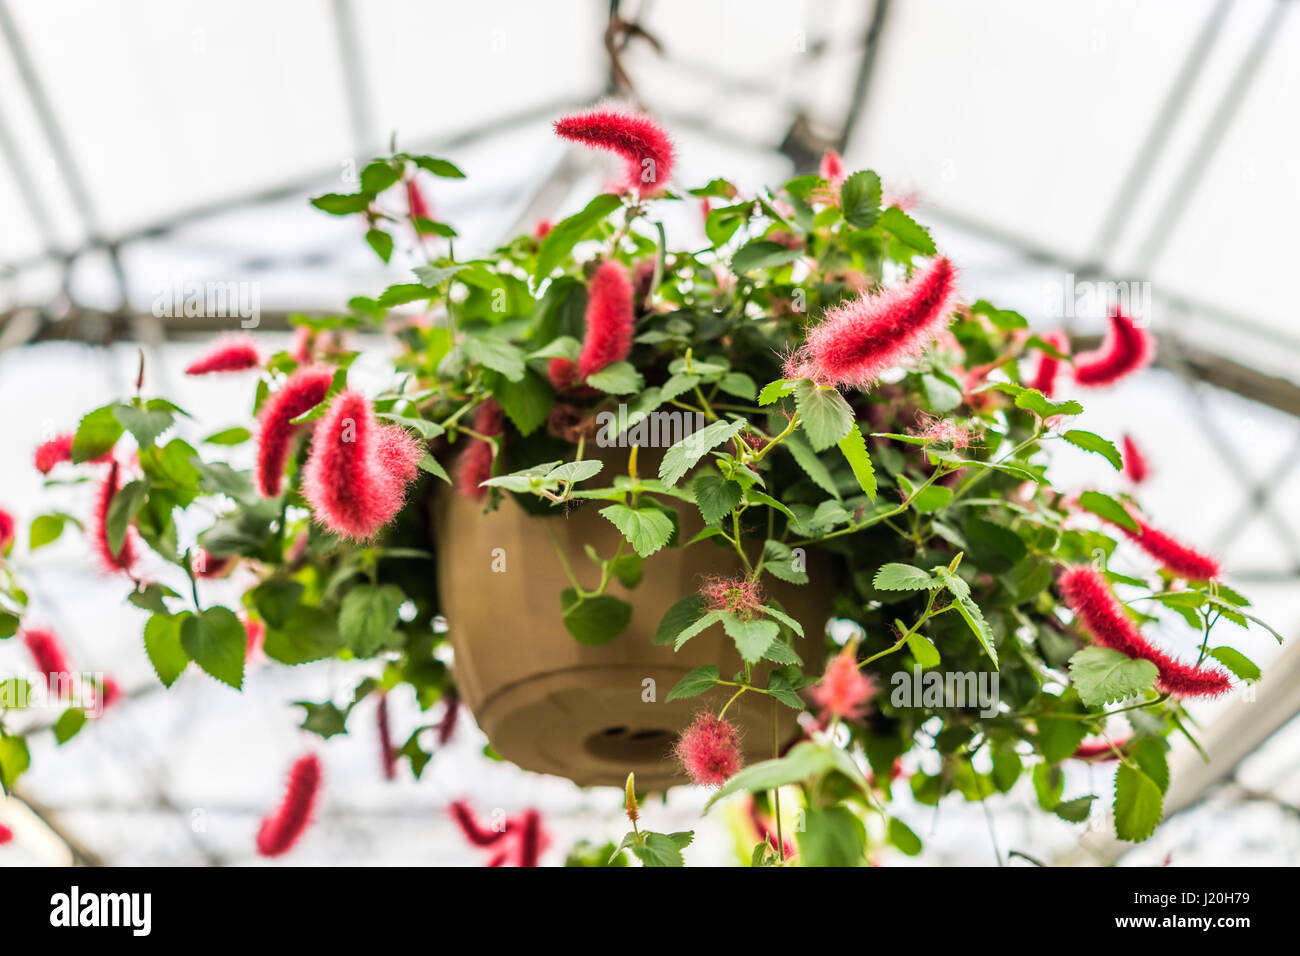 Chenille foxtail acalypha hanging flower pot Stock Photo